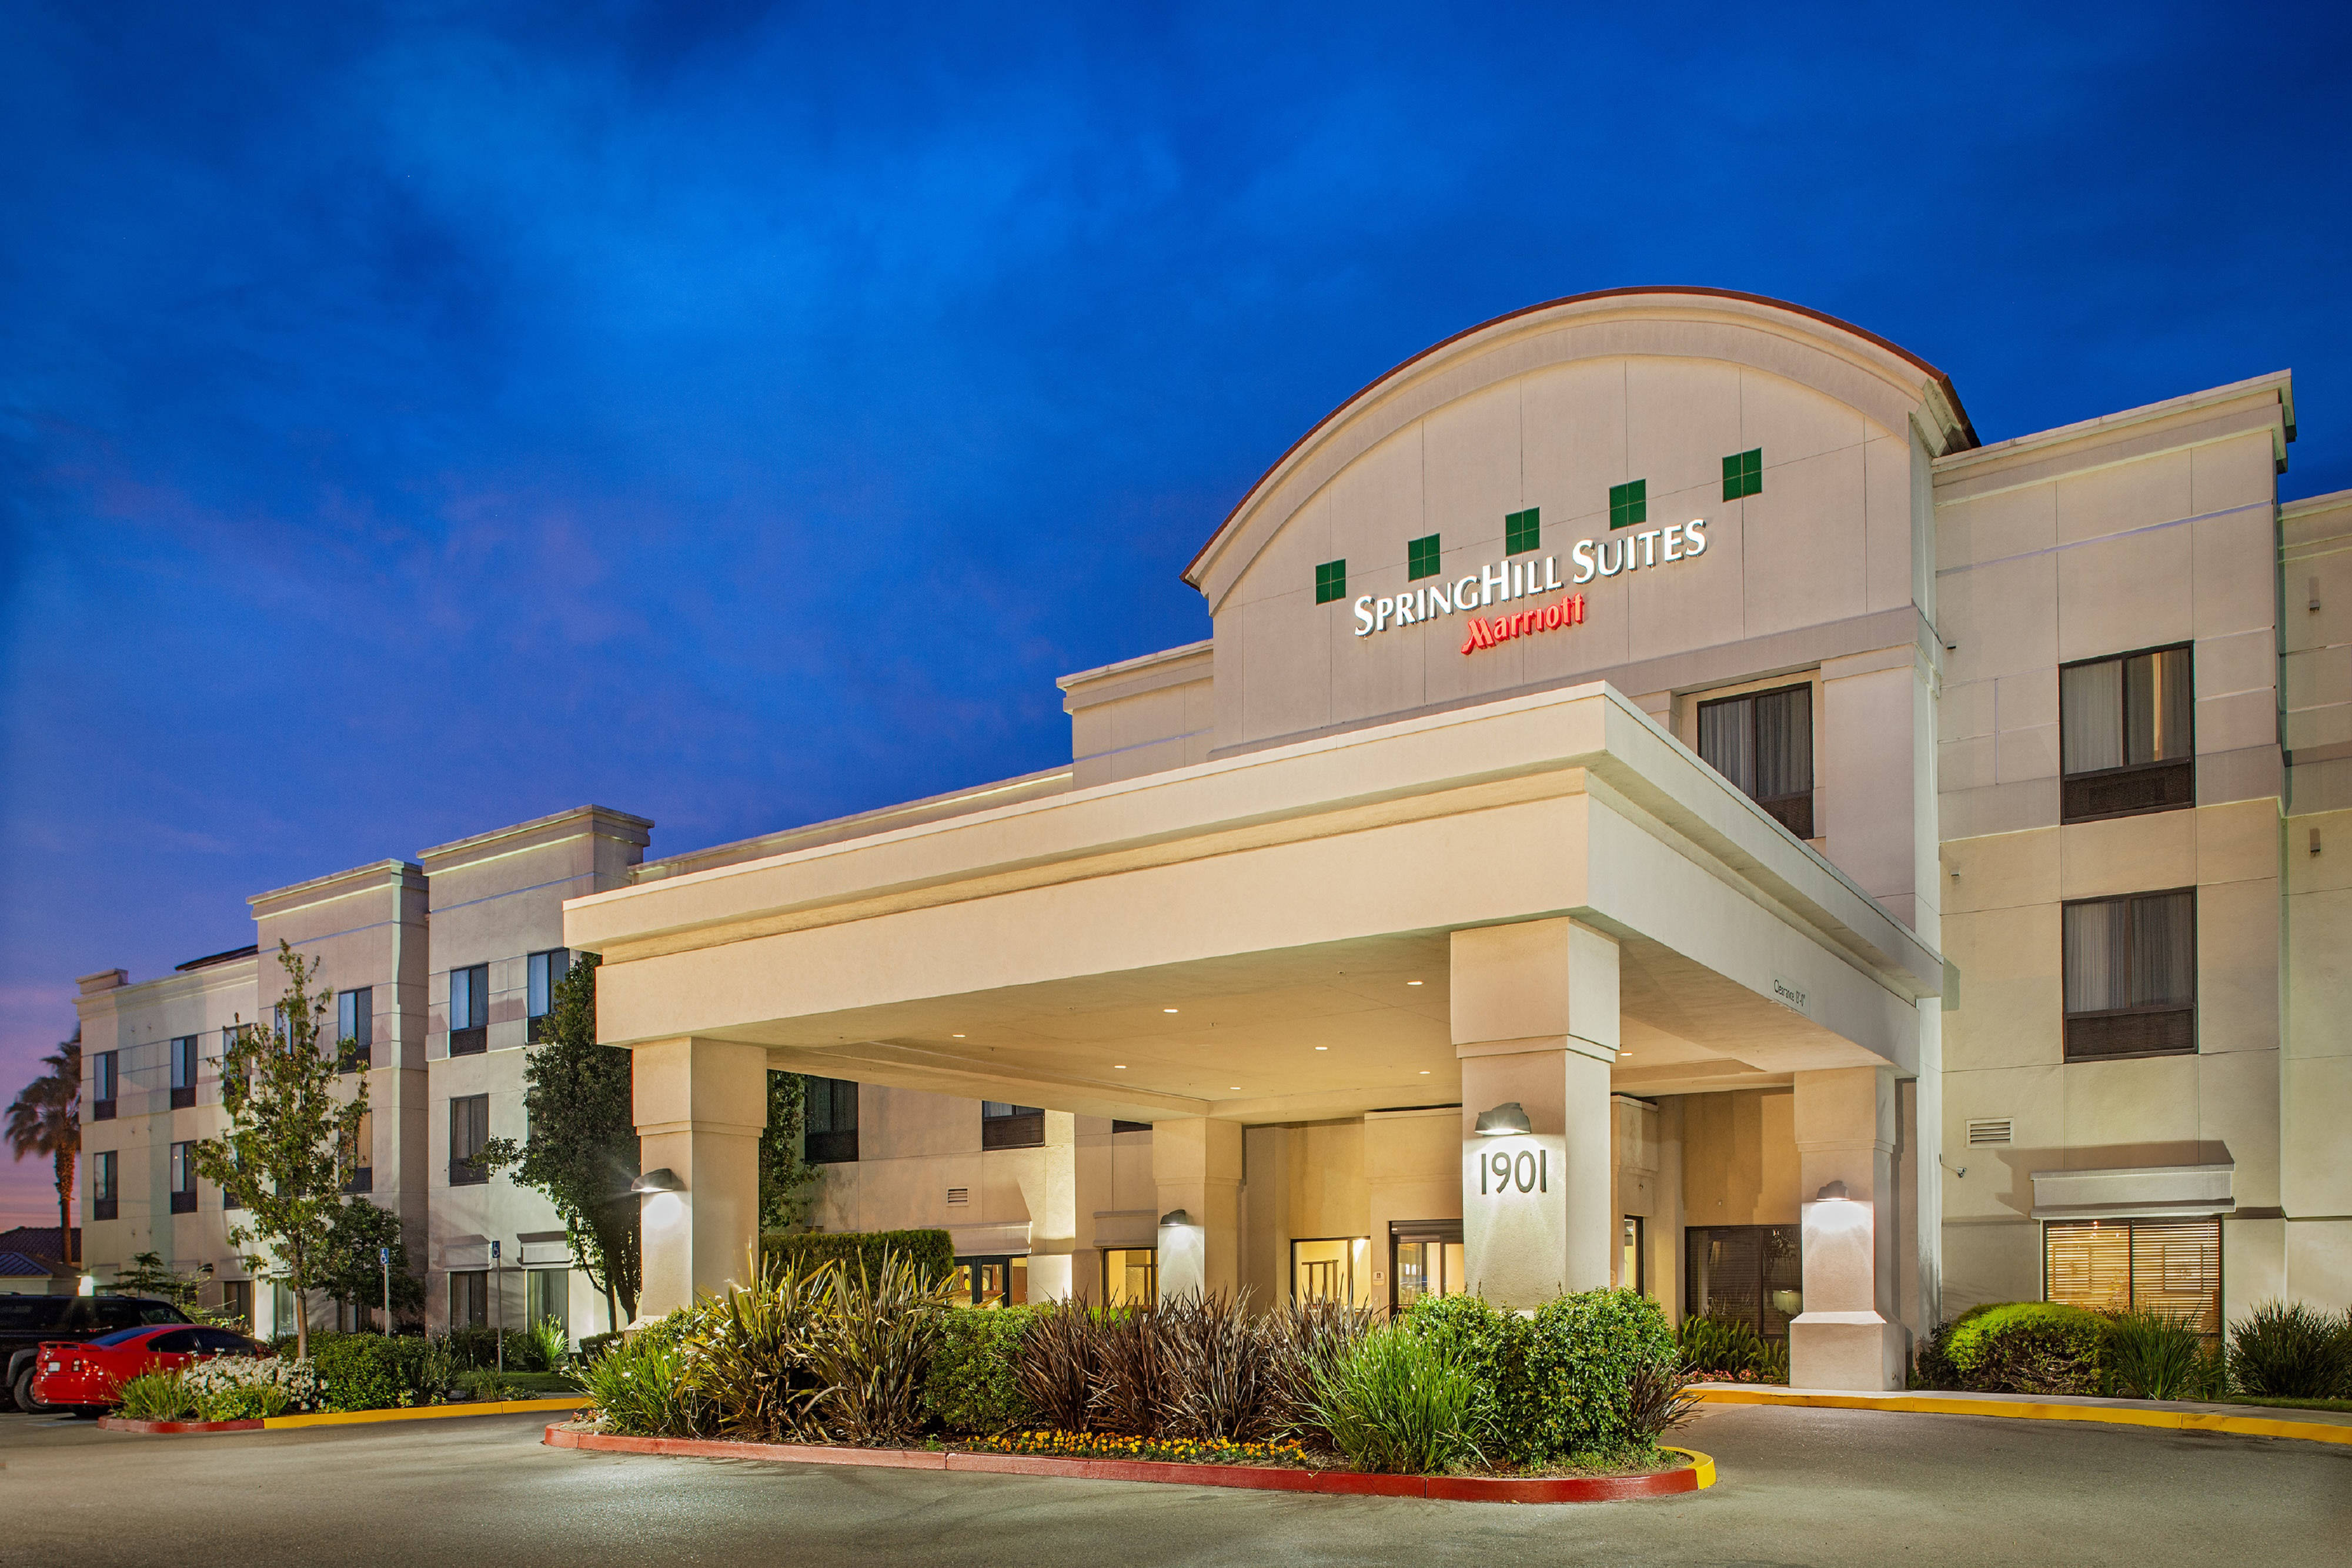 Photo of SpringHill Suites by Marriott Modesto, Modesto, CA